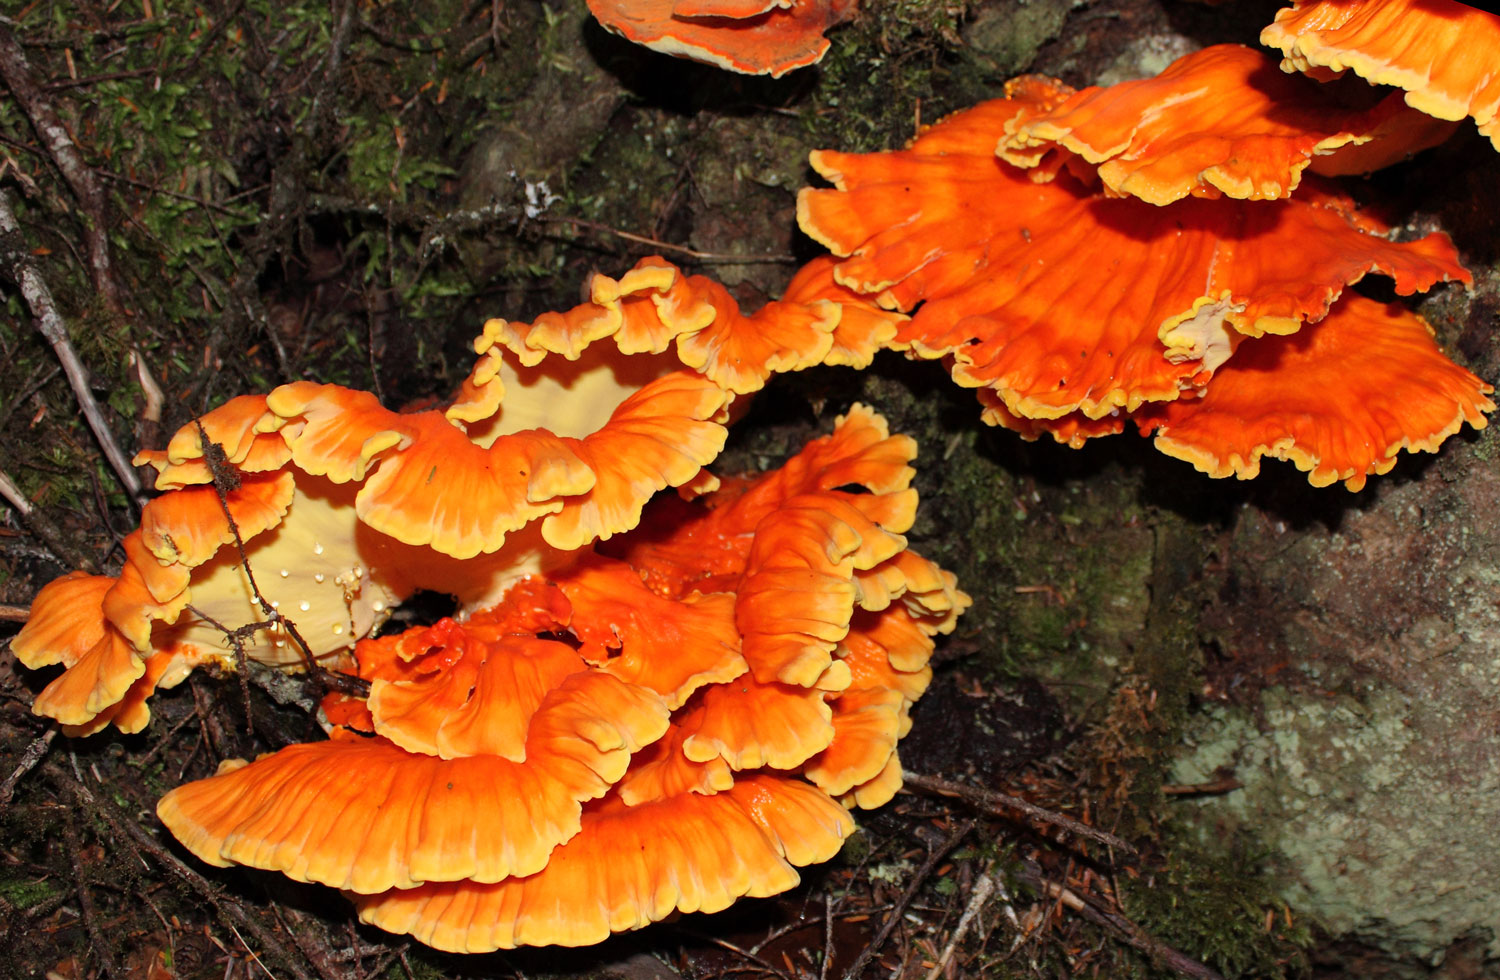 Chicken of the woods ( Laetiporus conifericola )  is edible when young and tender.